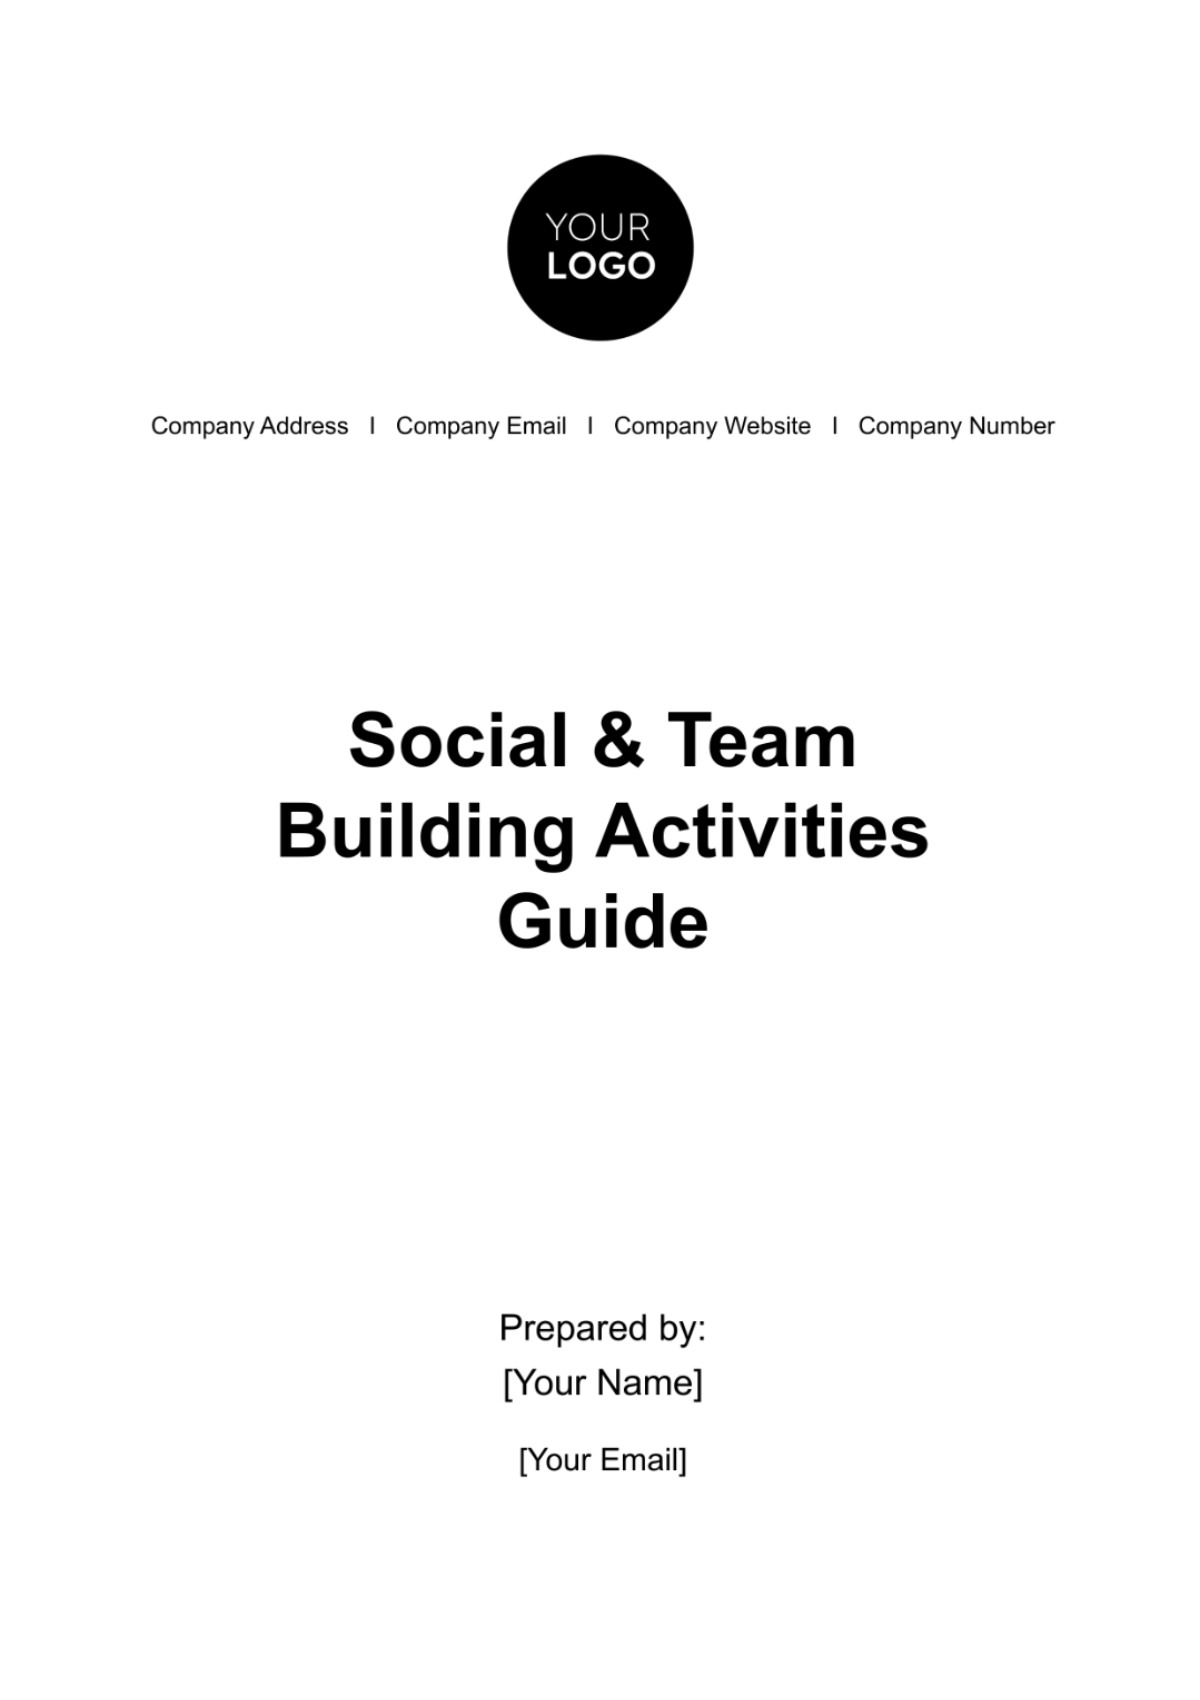 Free Social & Team Building Activities Guide HR Template